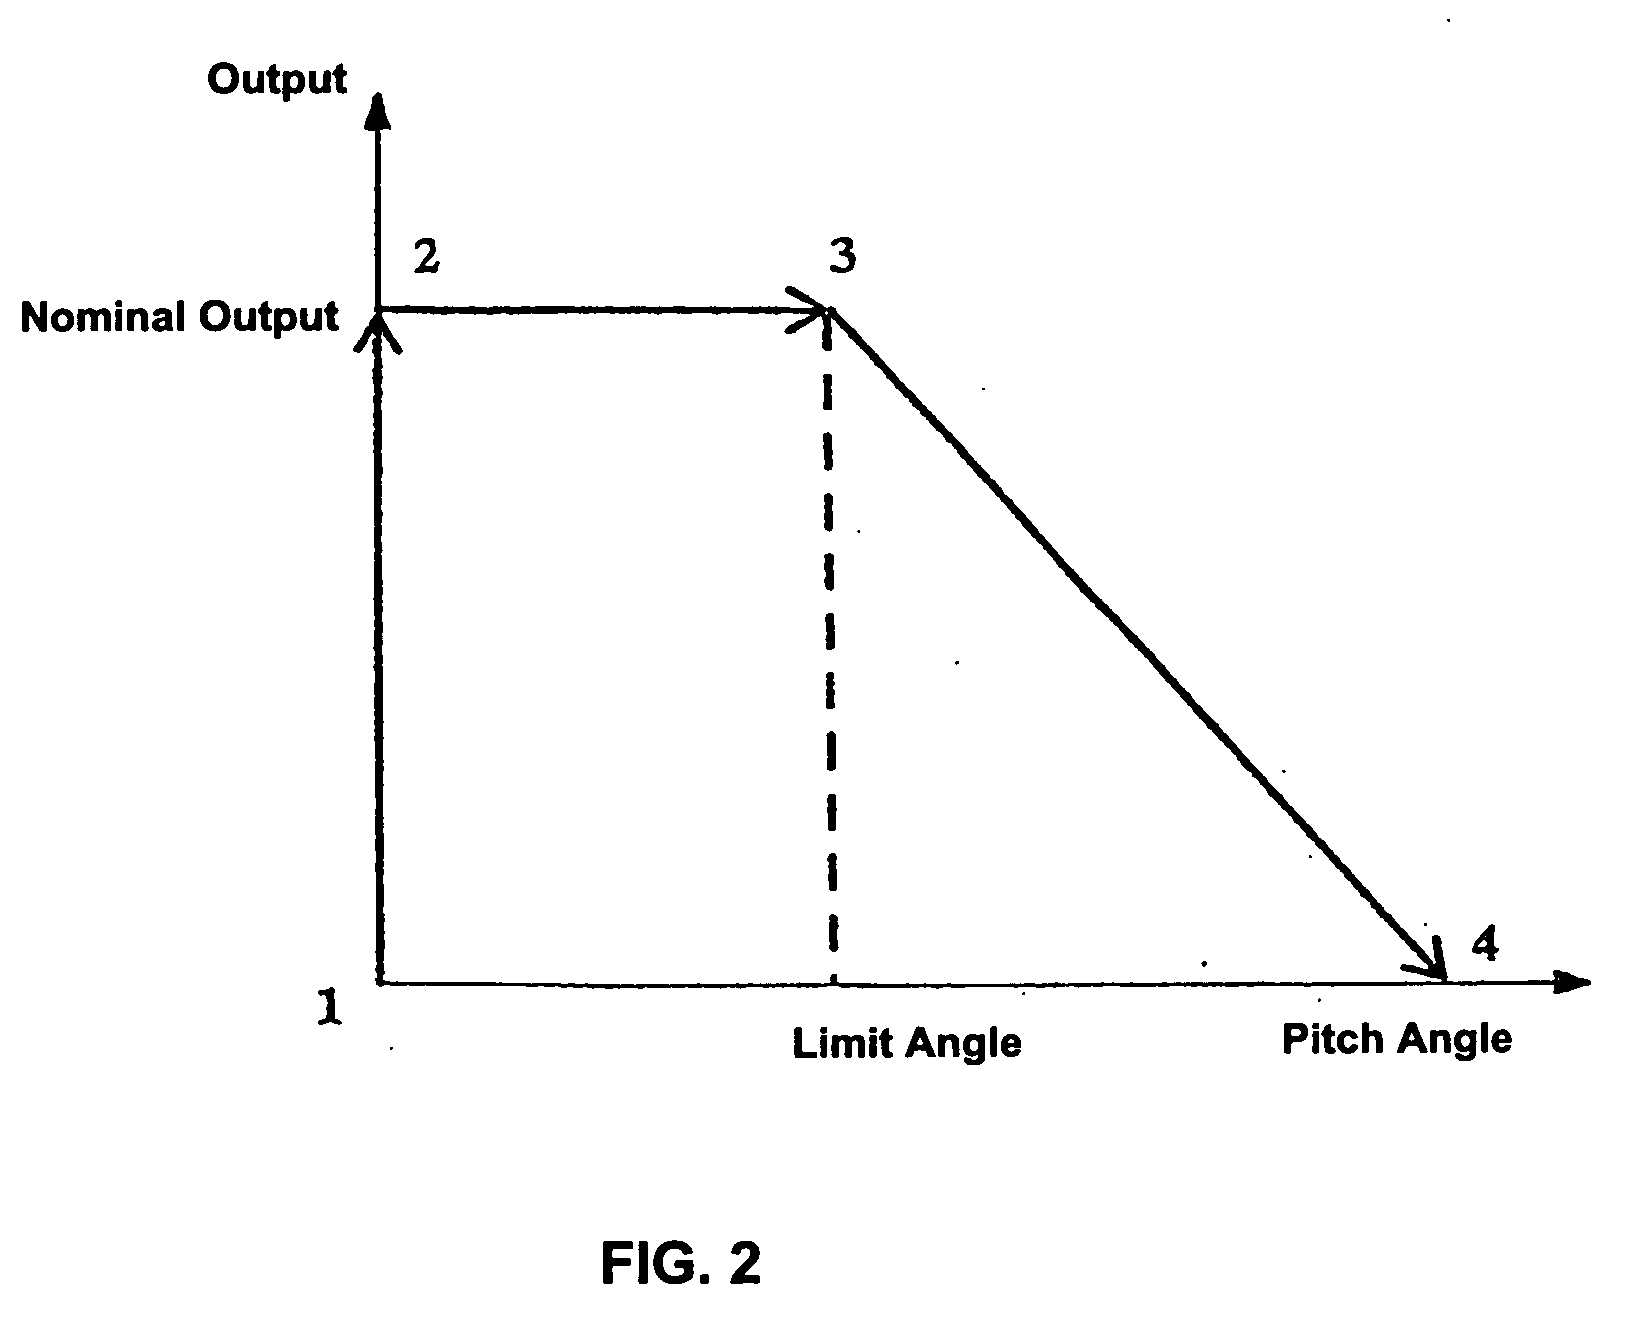 Management system for the operation of a wind turbine